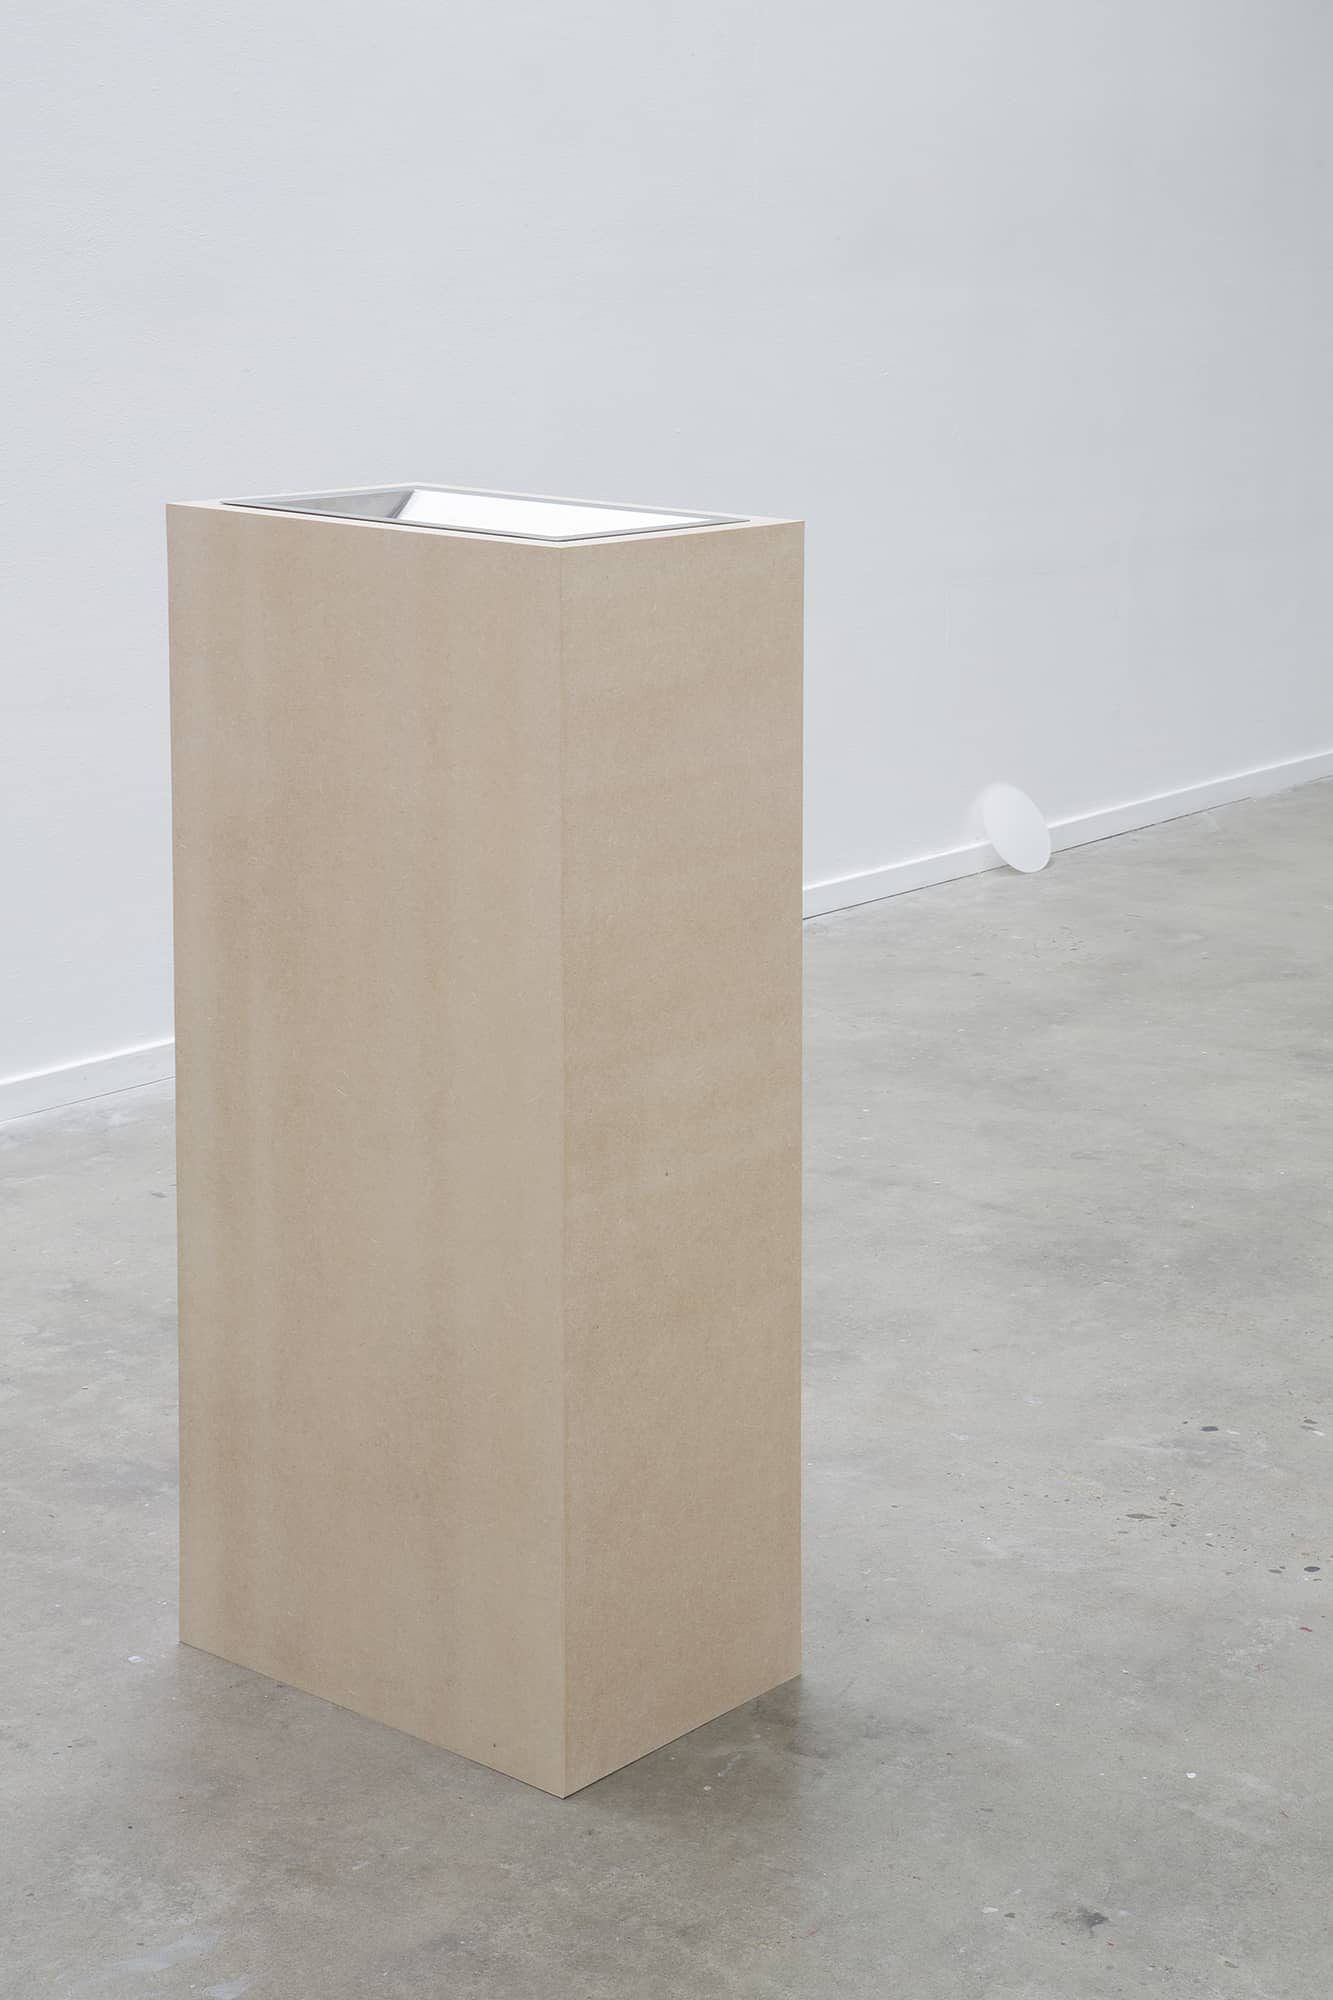 Transaction Tray, stainless steel, mdf plinth, 110 x 47 x 32 cm, 2012